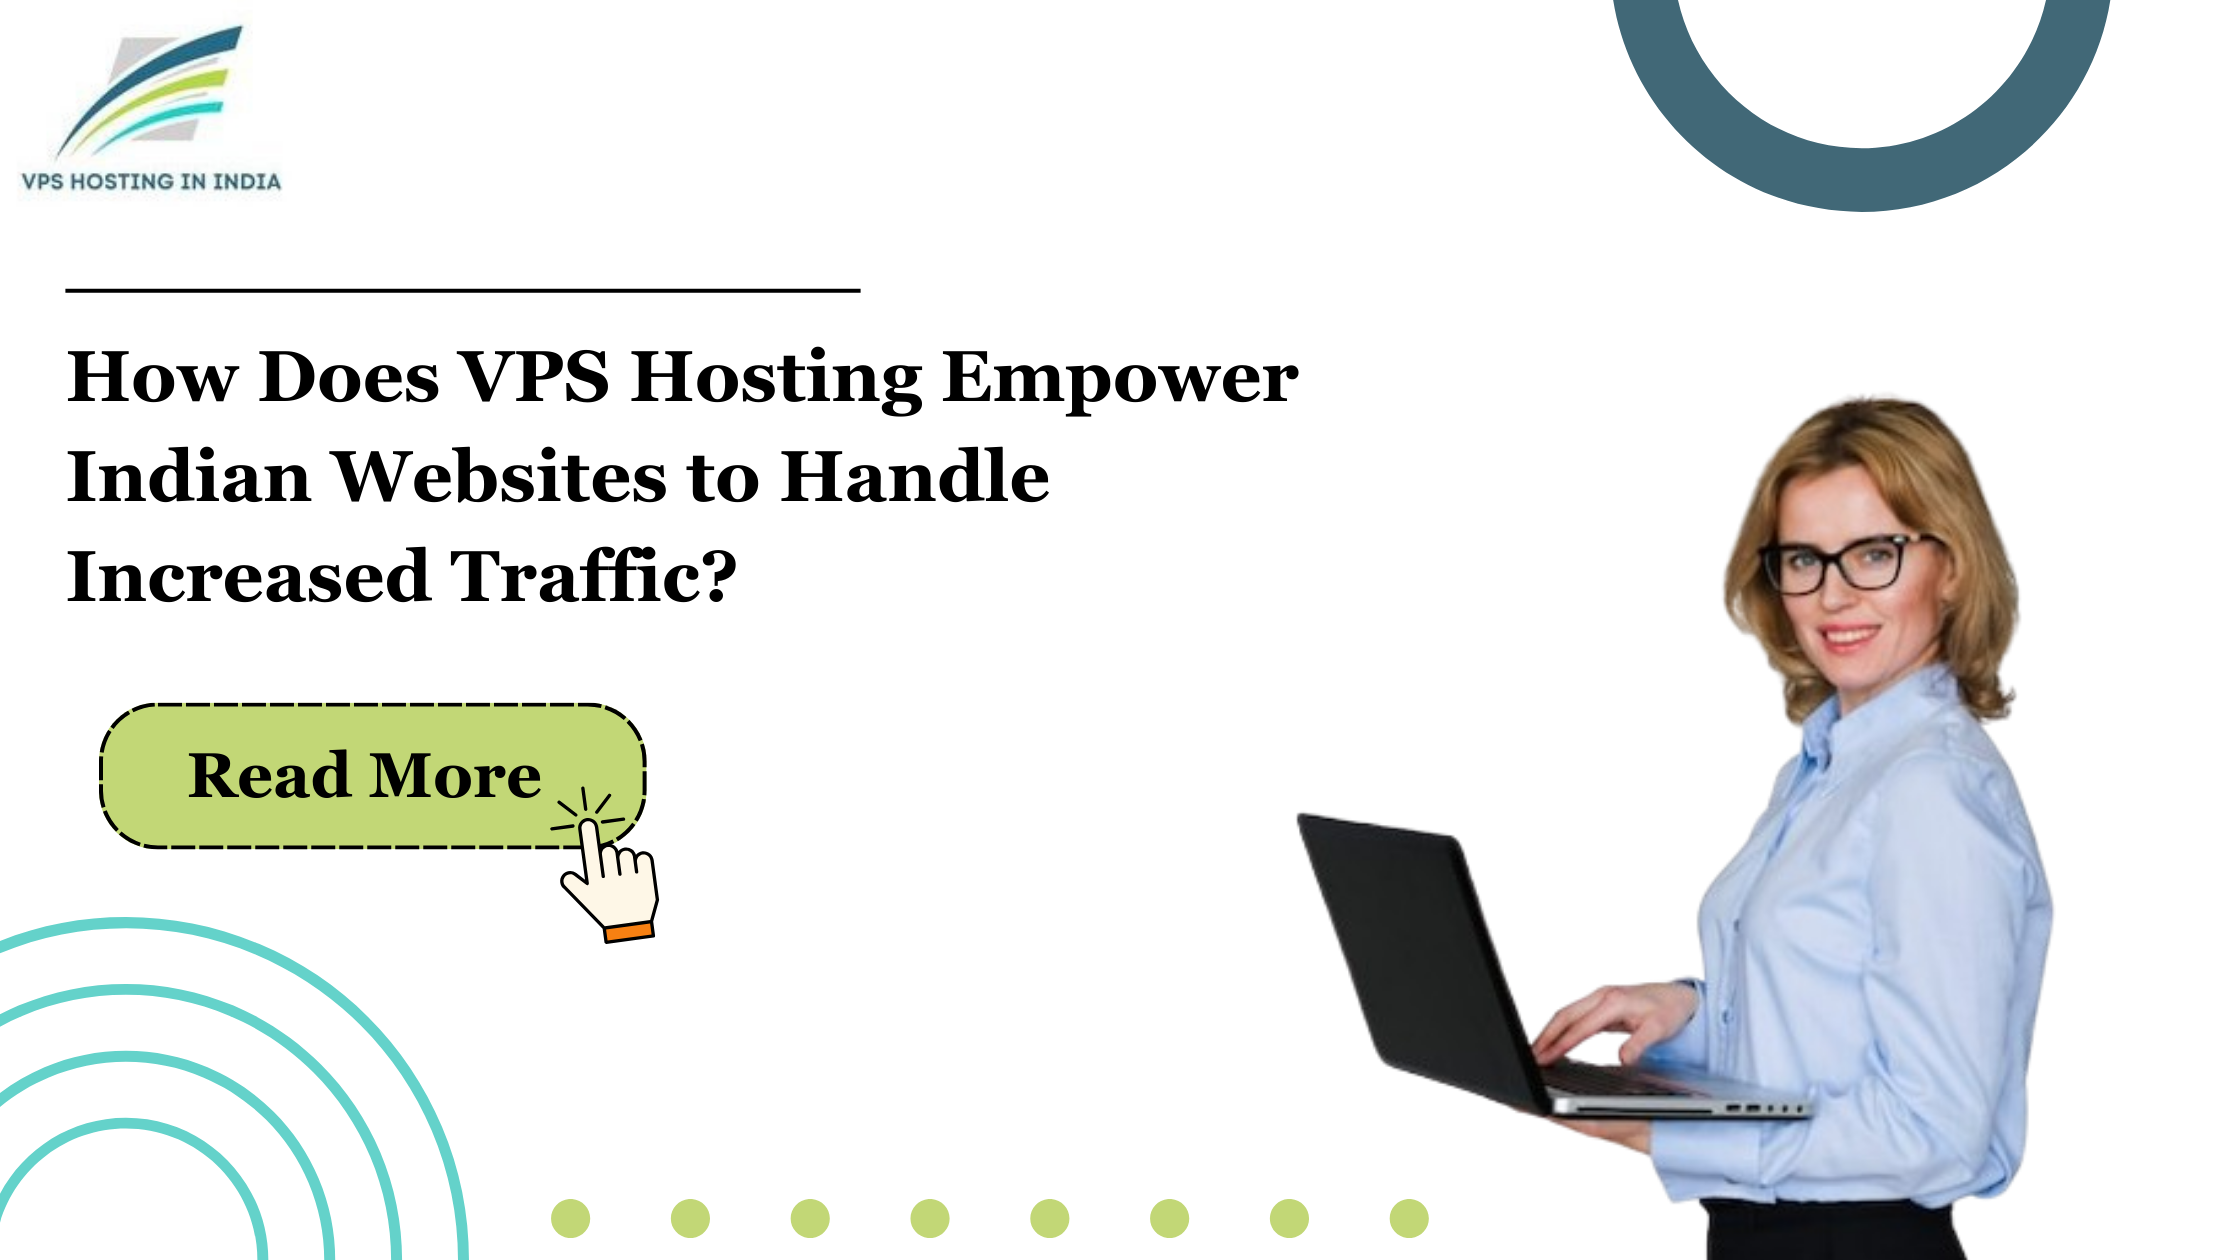 How Does VPS Hosting Empower Indian Websites to Handle Increased Traffic